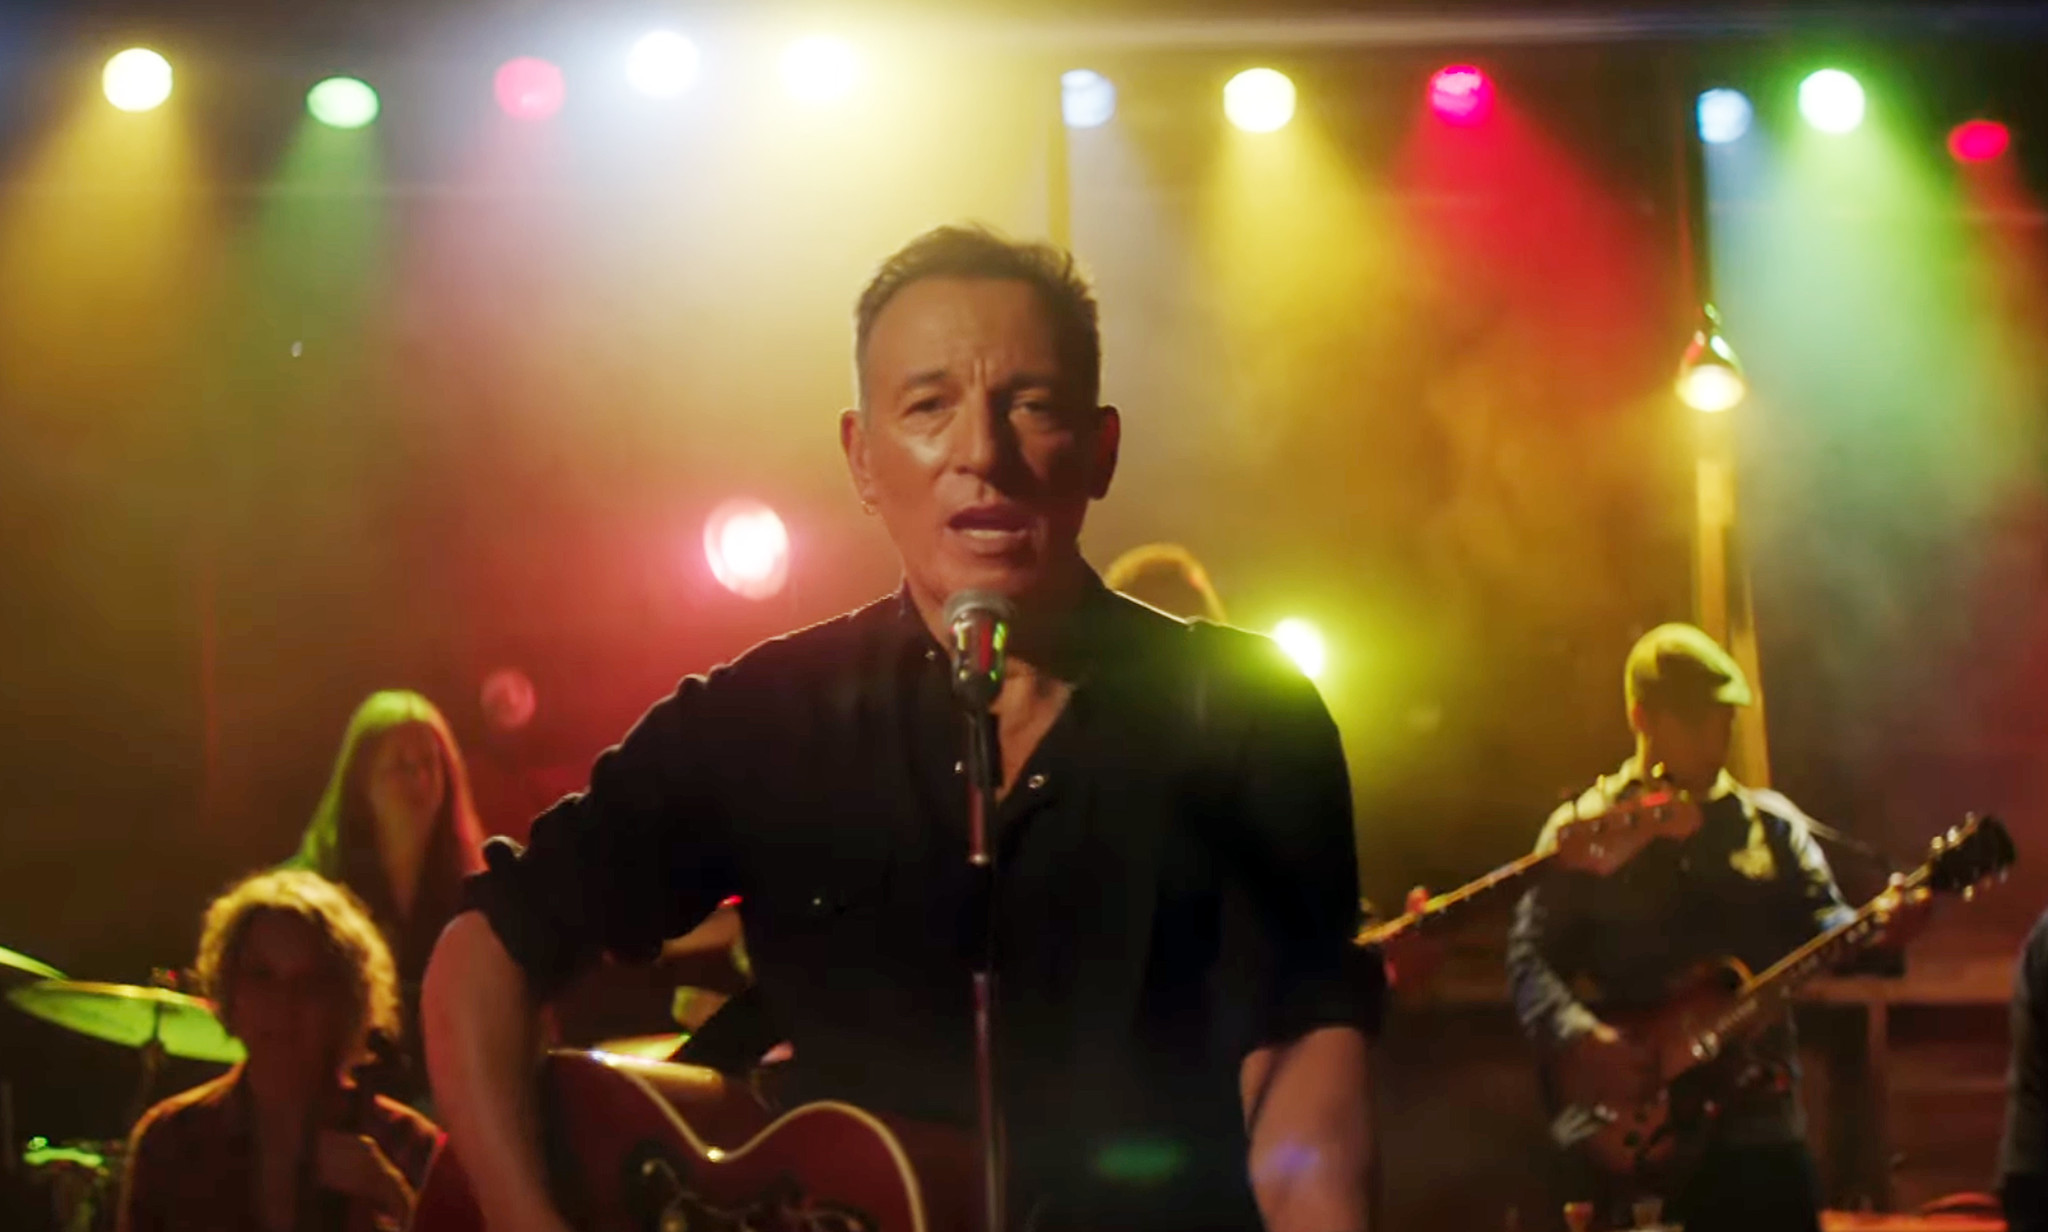 See it: Bruce Springsteen releases video for ‘Western Stars’ to celebrate new album